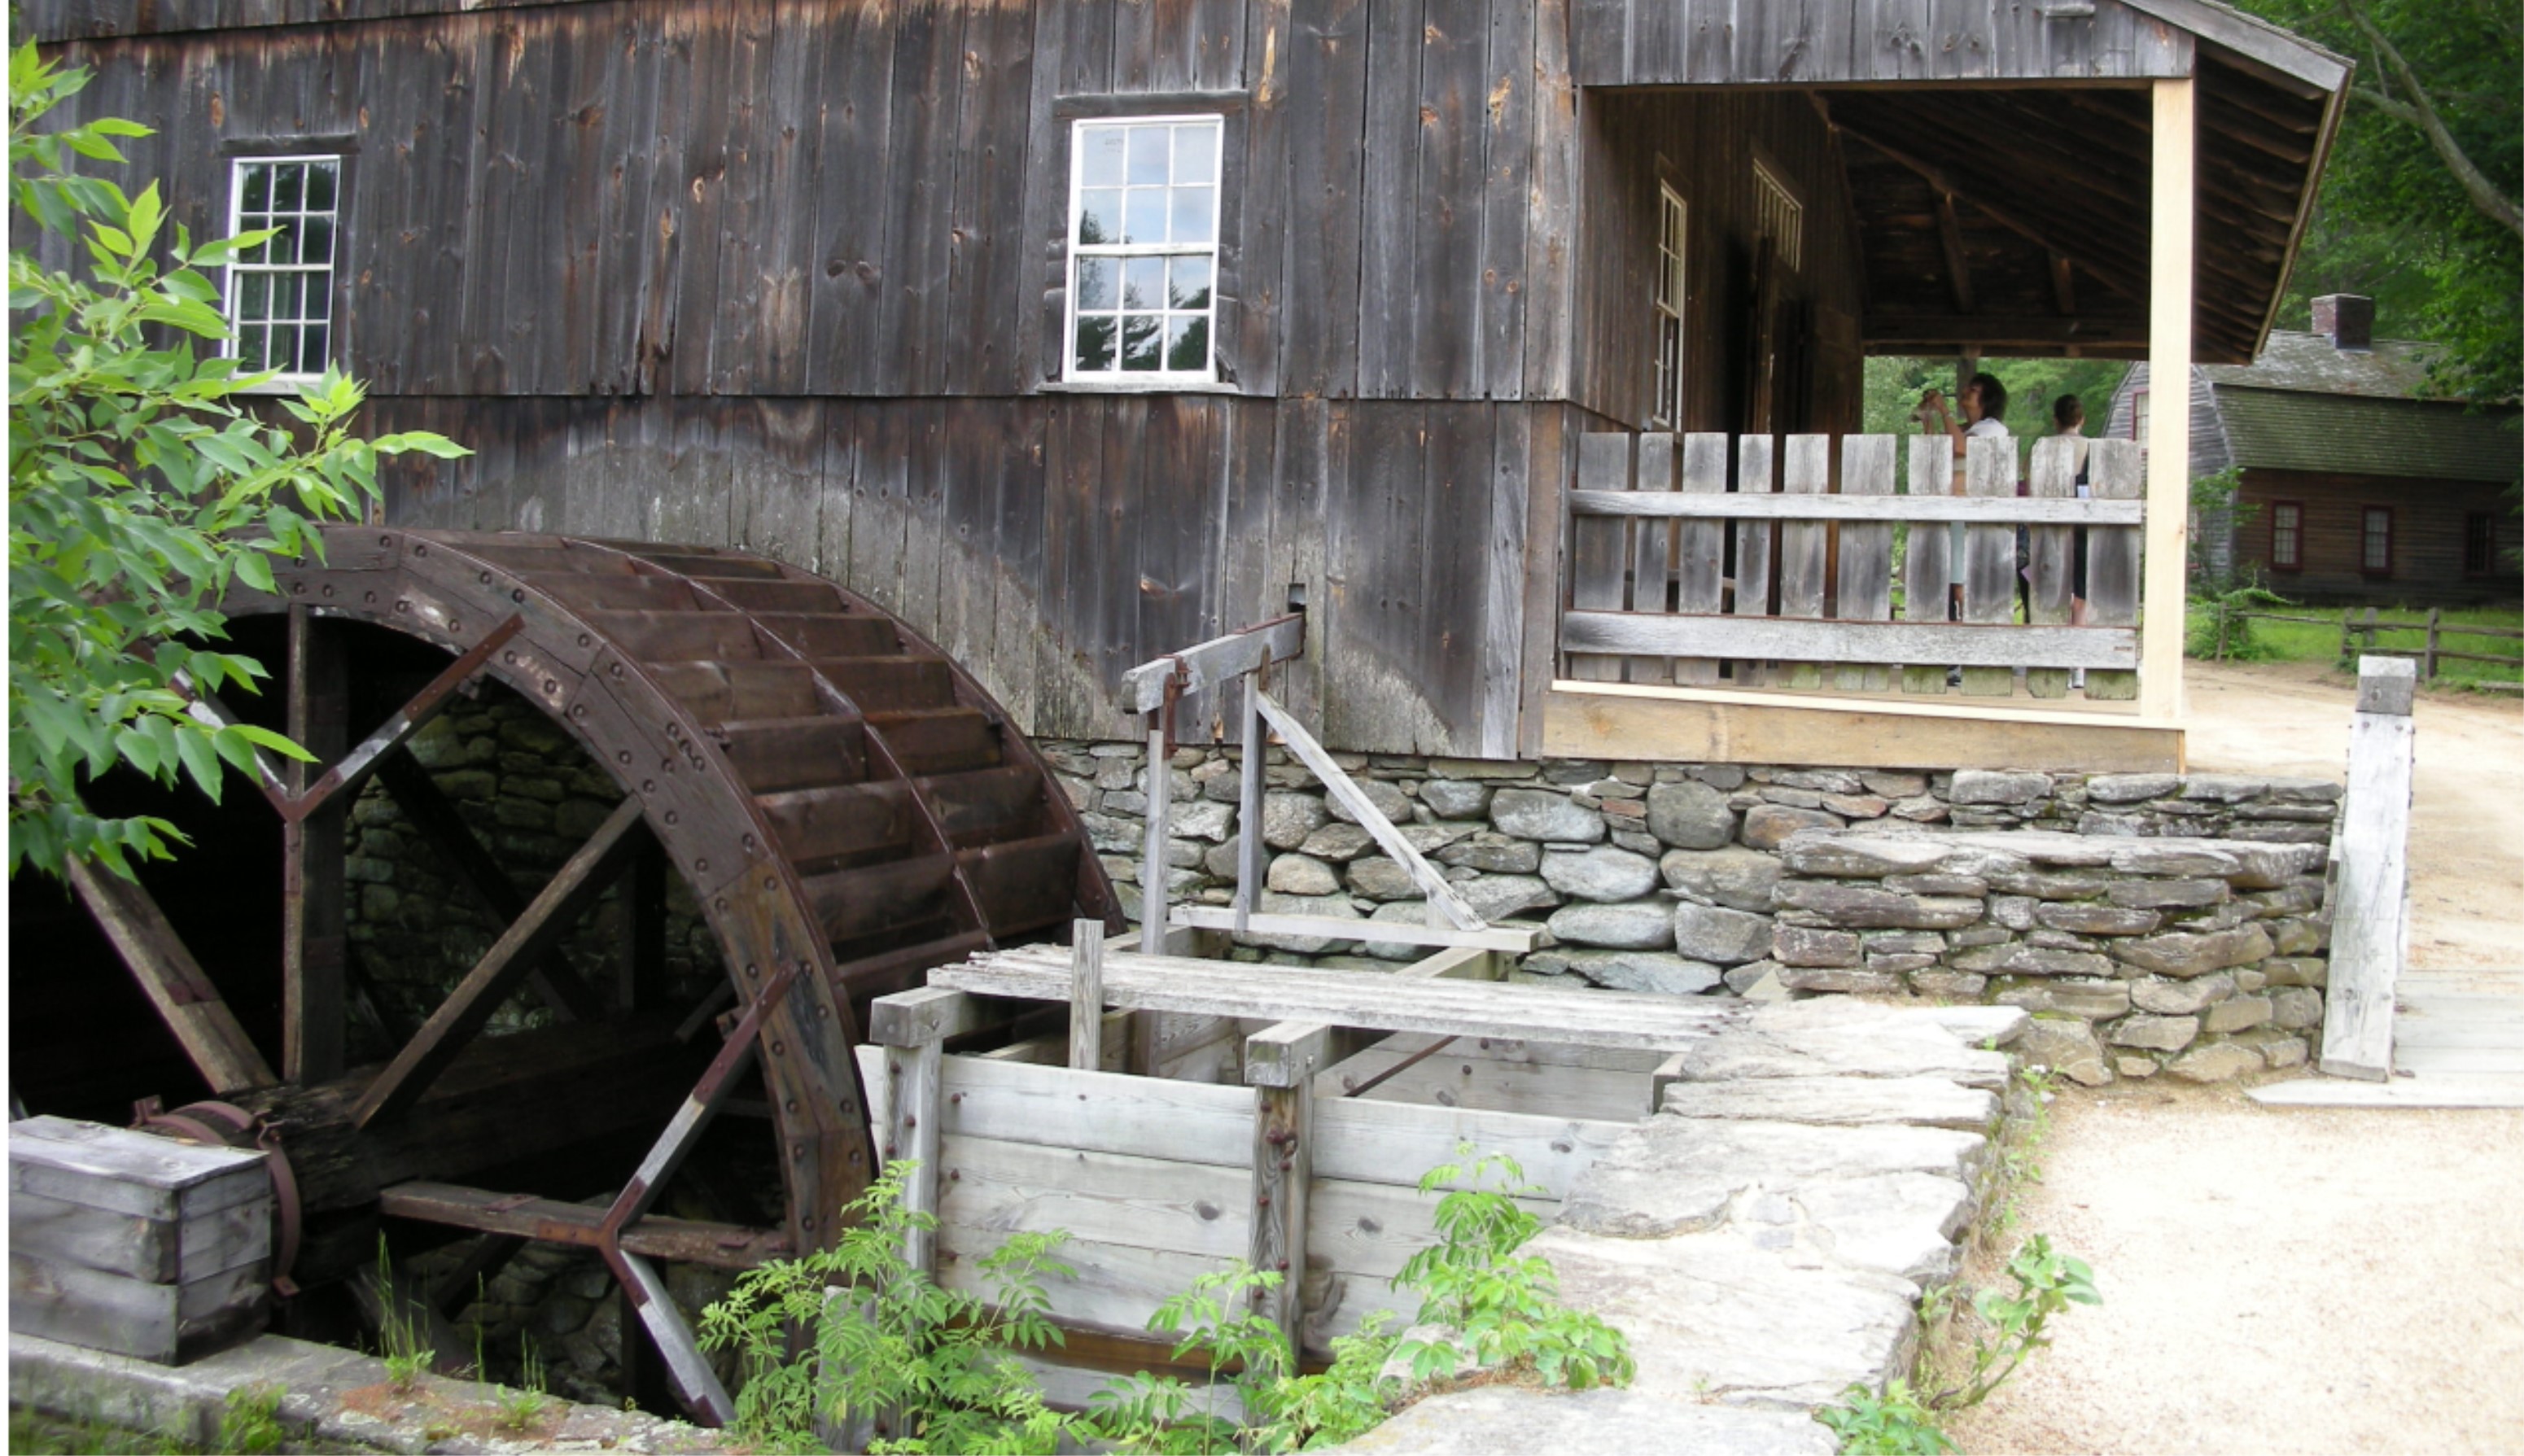 Water Wheel from Ancient Syria